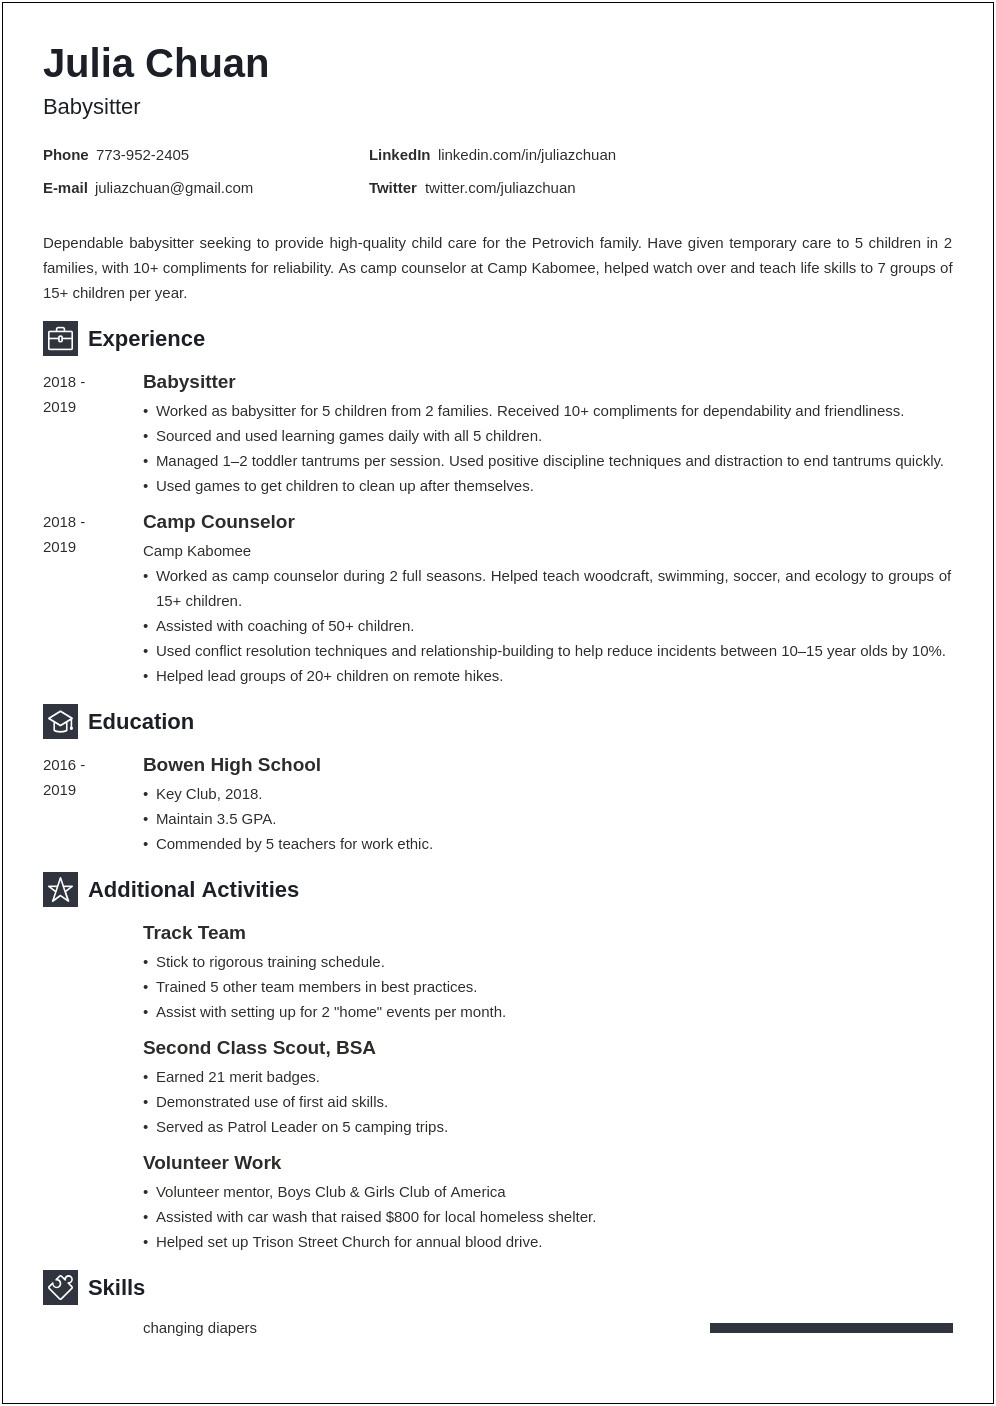 Resume With Only 5 Year Work History